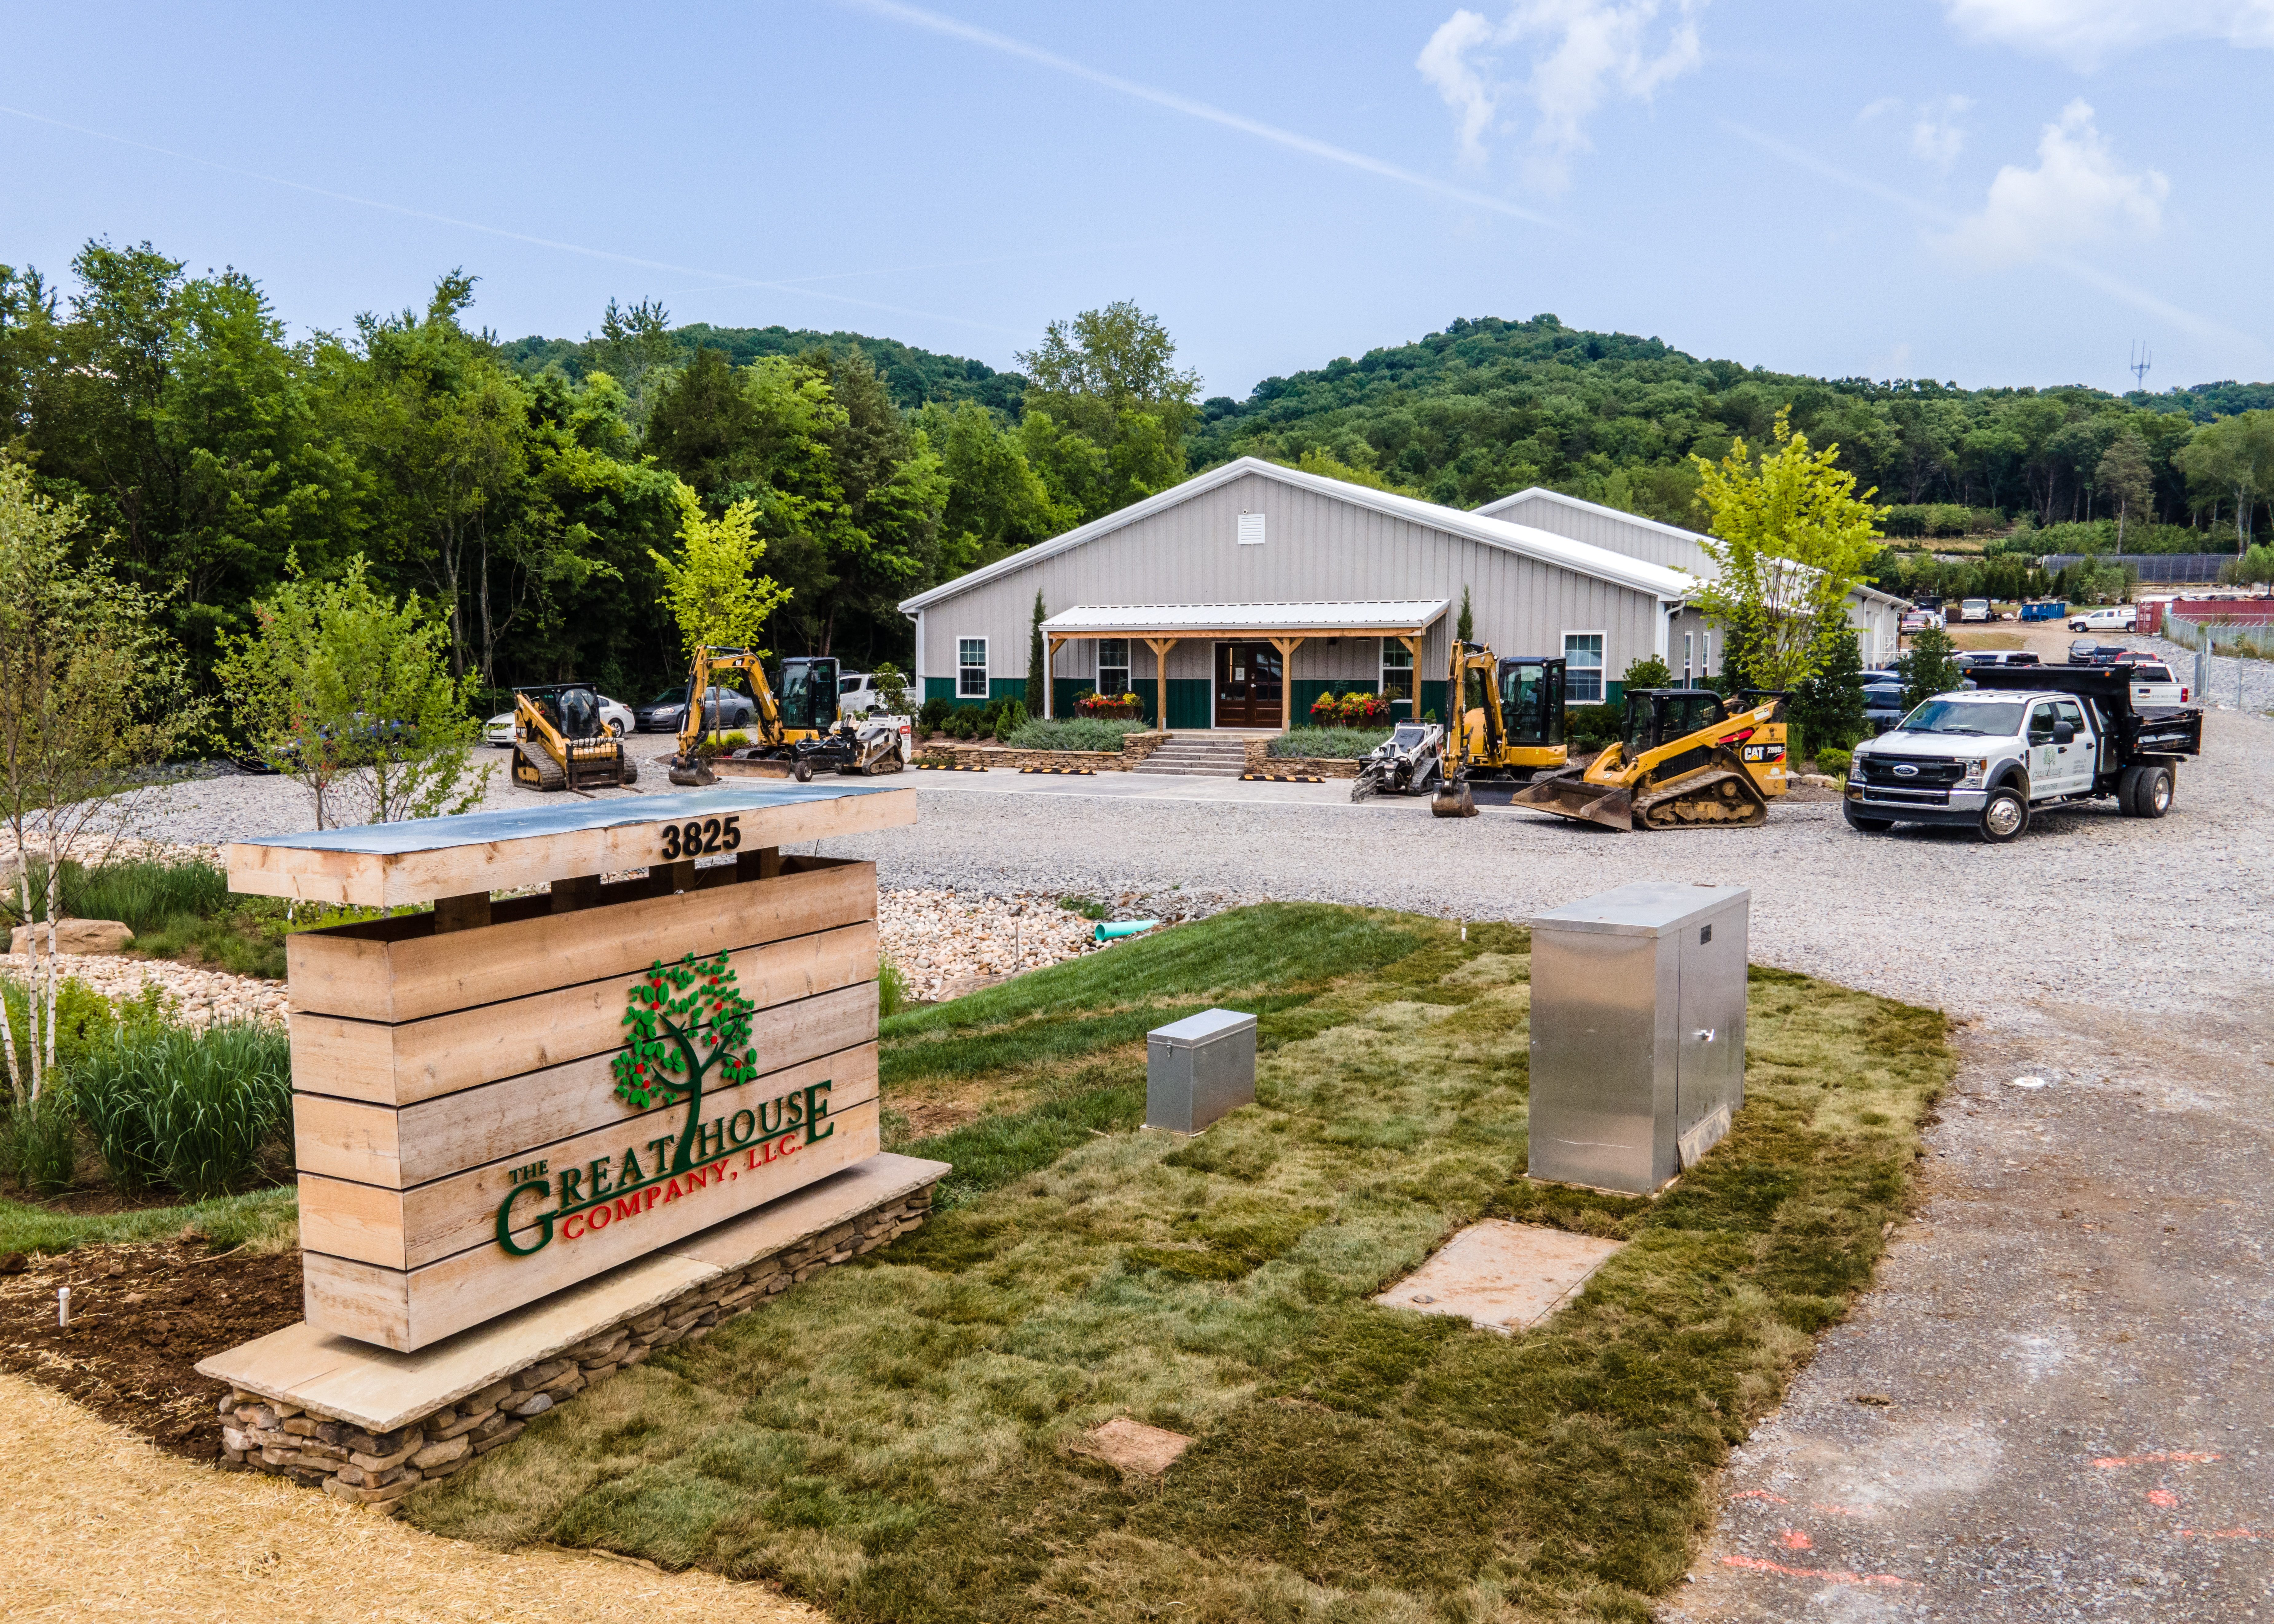 The Greathouse Company is hosting LandOpt's Business & Barbecue educational event for landscape contractors at its Nashville headquarters August 1-2. Attendees will tour the award-winning company's facilities, as well as attend sessions designed to increase profitability.